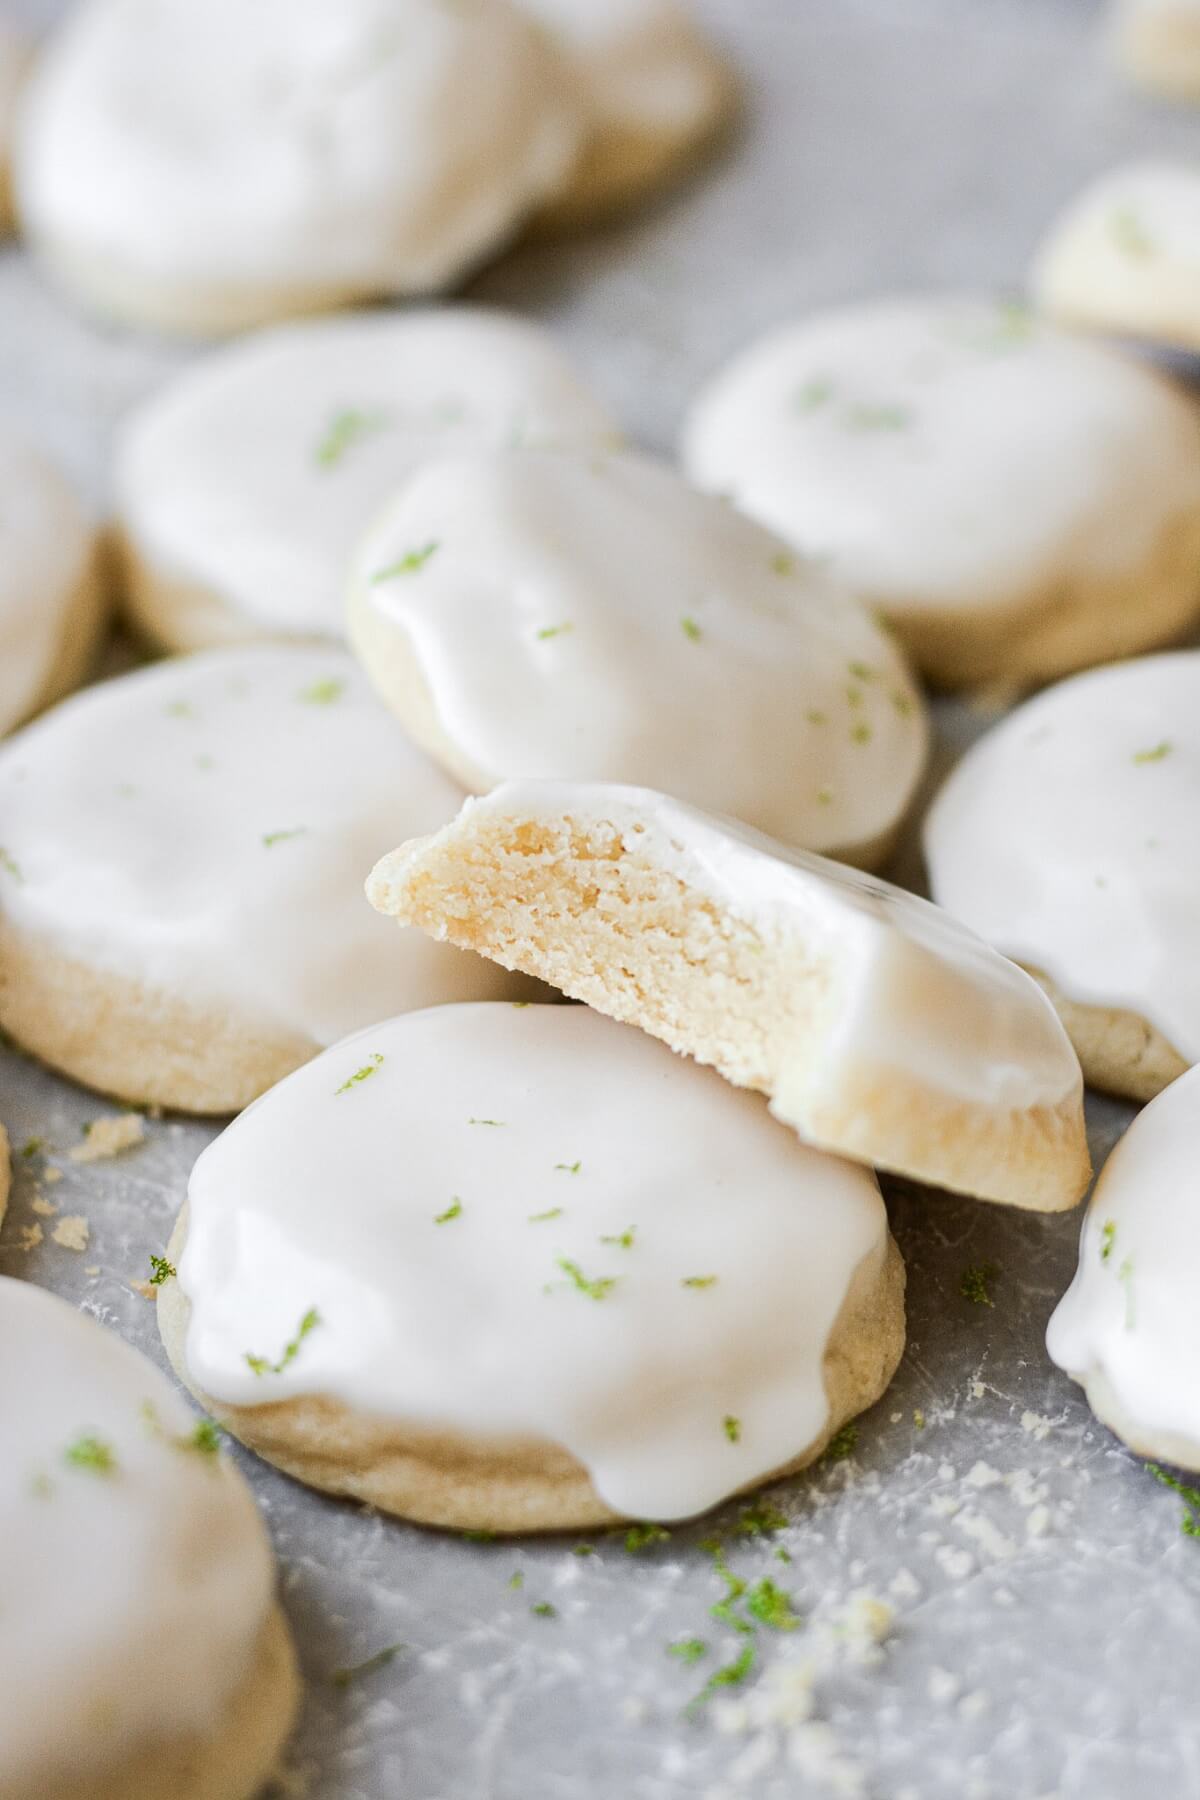 Iced lime sugar cookies, one with a bite taken.